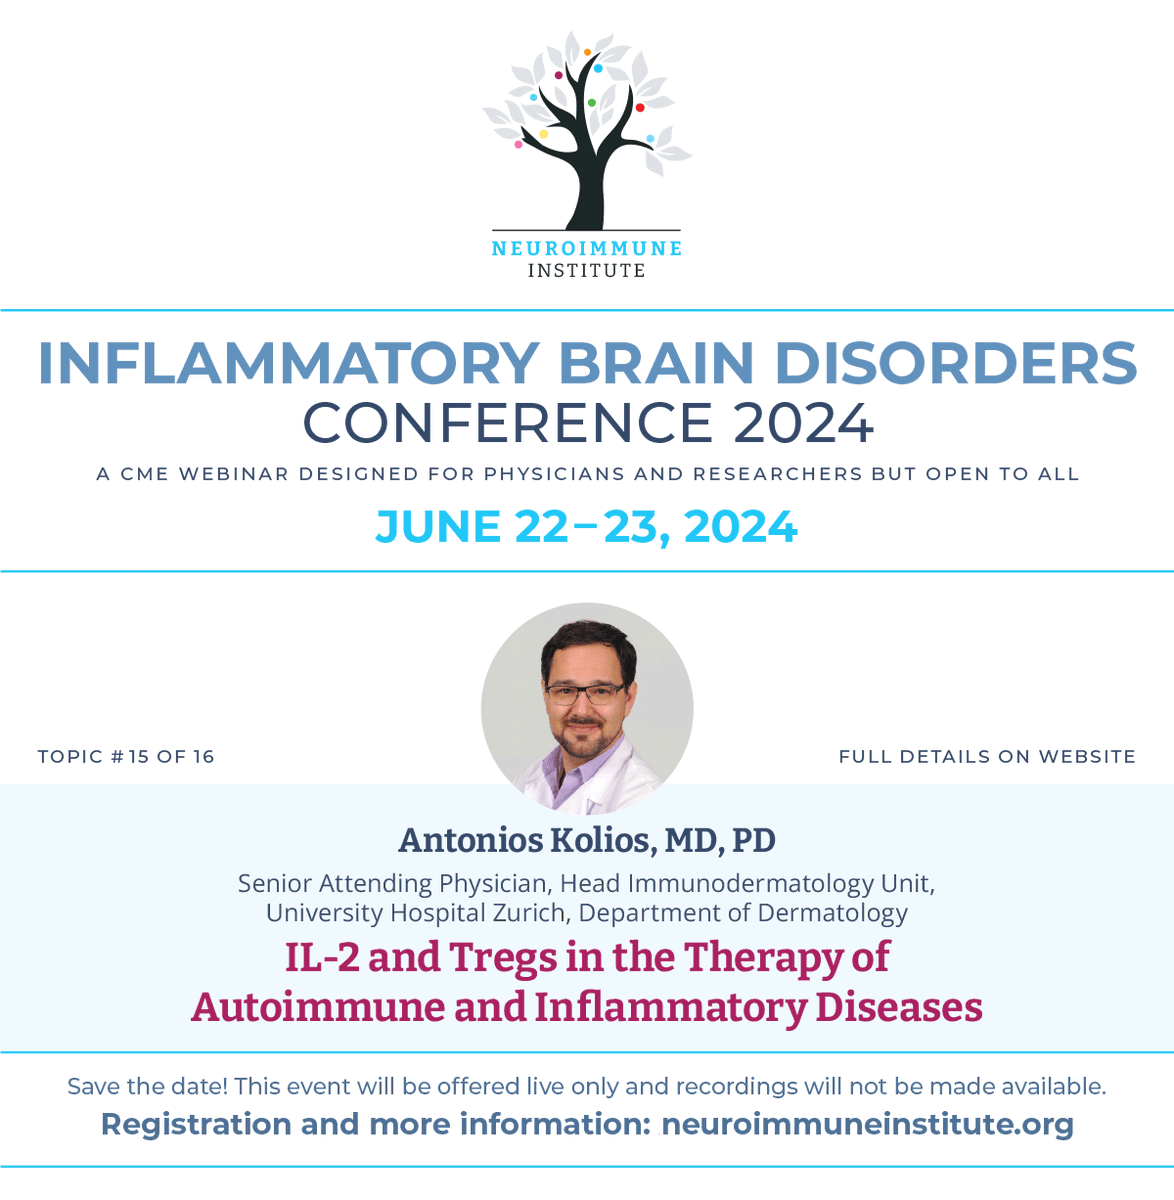 We are really looking forward to the 2024 Inflammatory Brain Disorders Conference and the phenomenal speakers from around the world who will be joining us to share the latest research and their clinical expertise. #cme #neuroinflammation